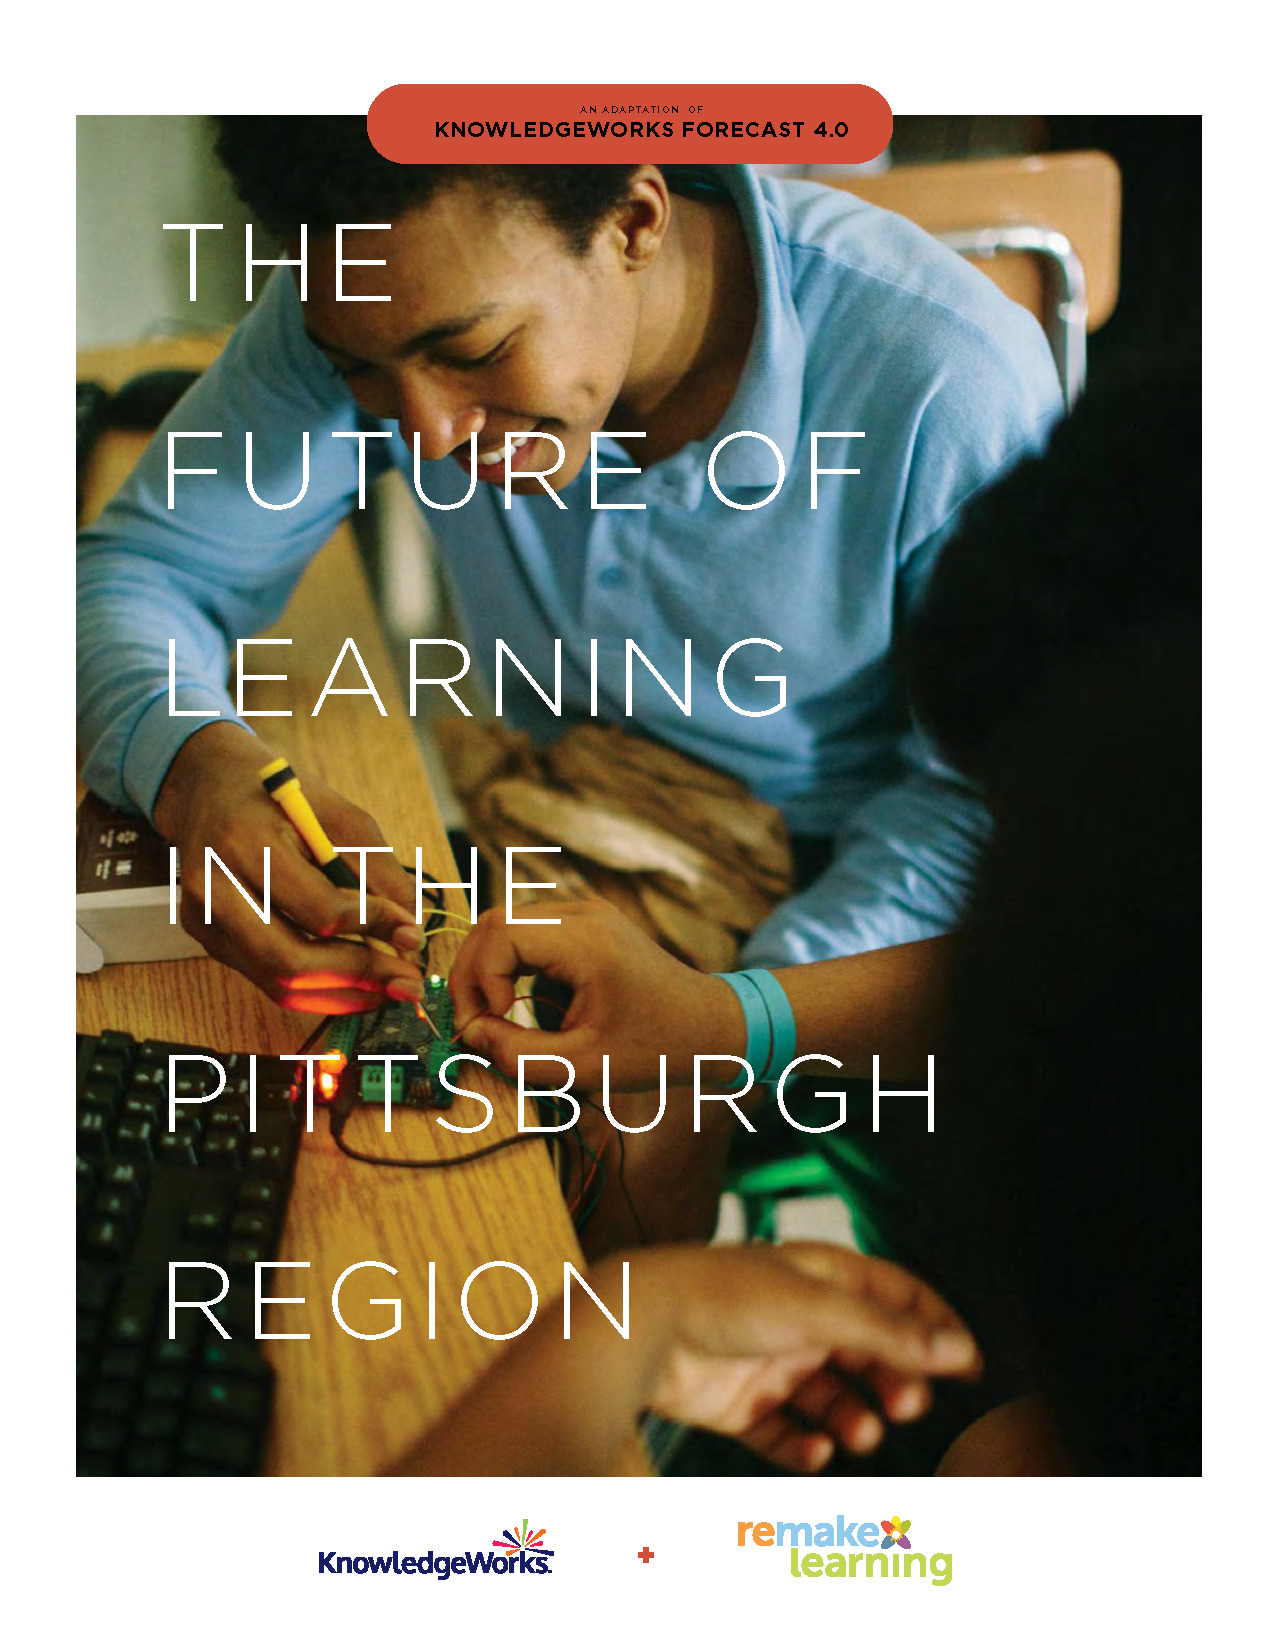 The Future of Learning in the Pittsburgh Region